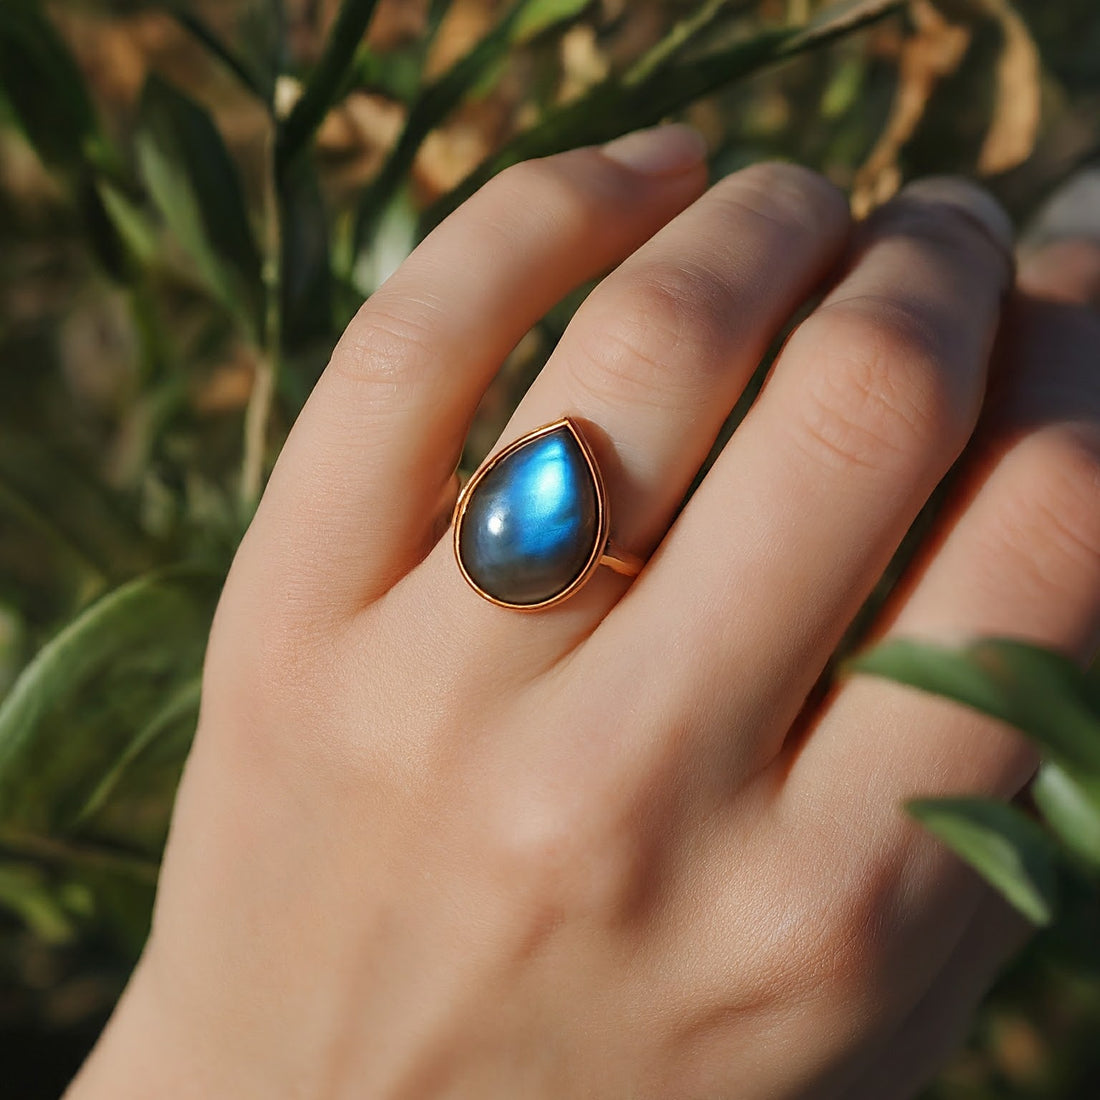 Key Points to Consider When Buying Labradorite Jewelry